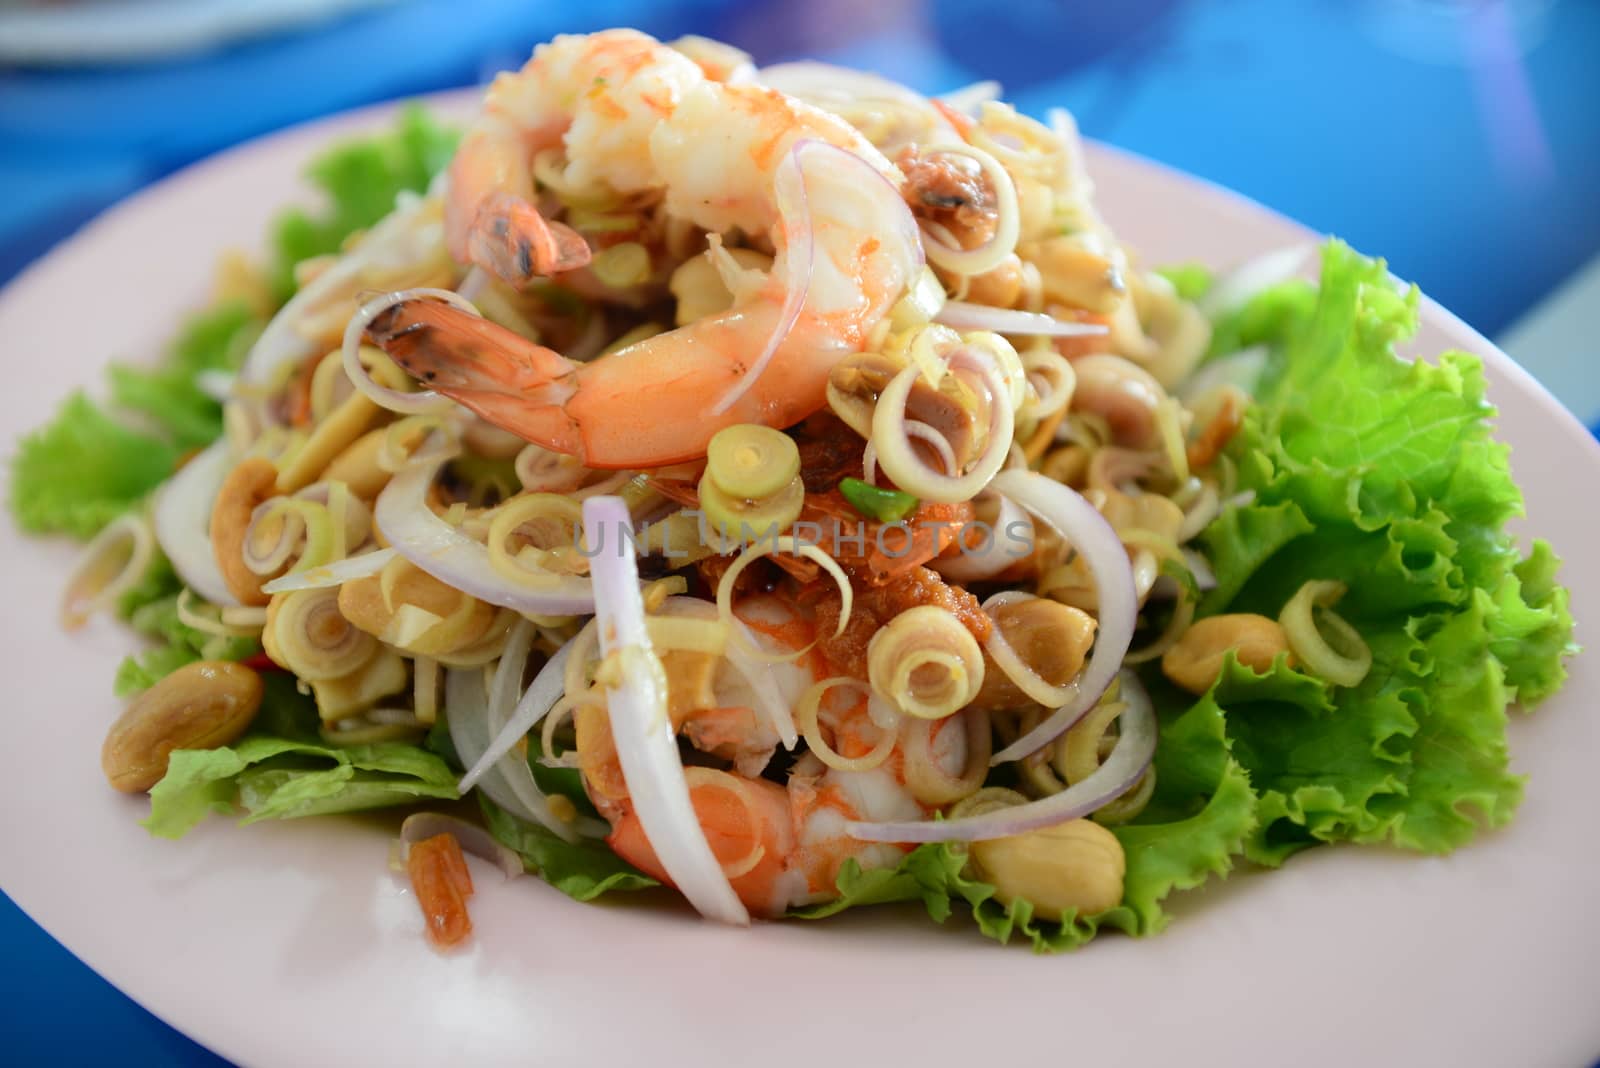 Spicy Lemongrass Salad with Shrimps by ideation90